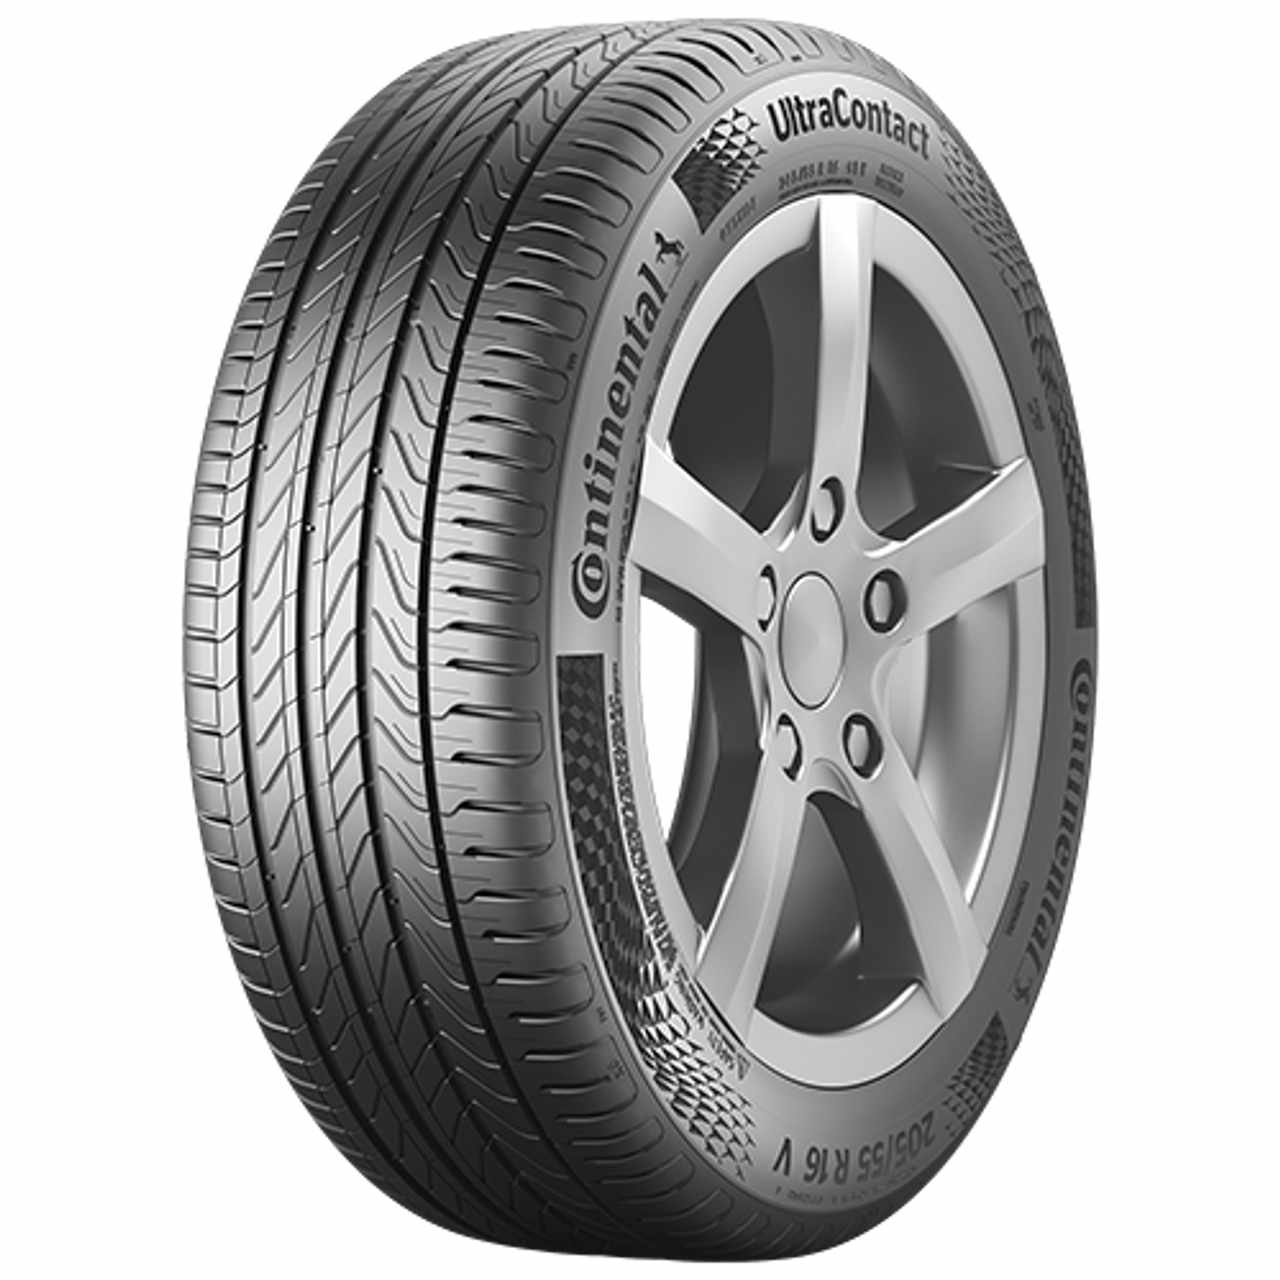 CONTINENTAL ULTRACONTACT (EVc) 175/70R14 84T BSW